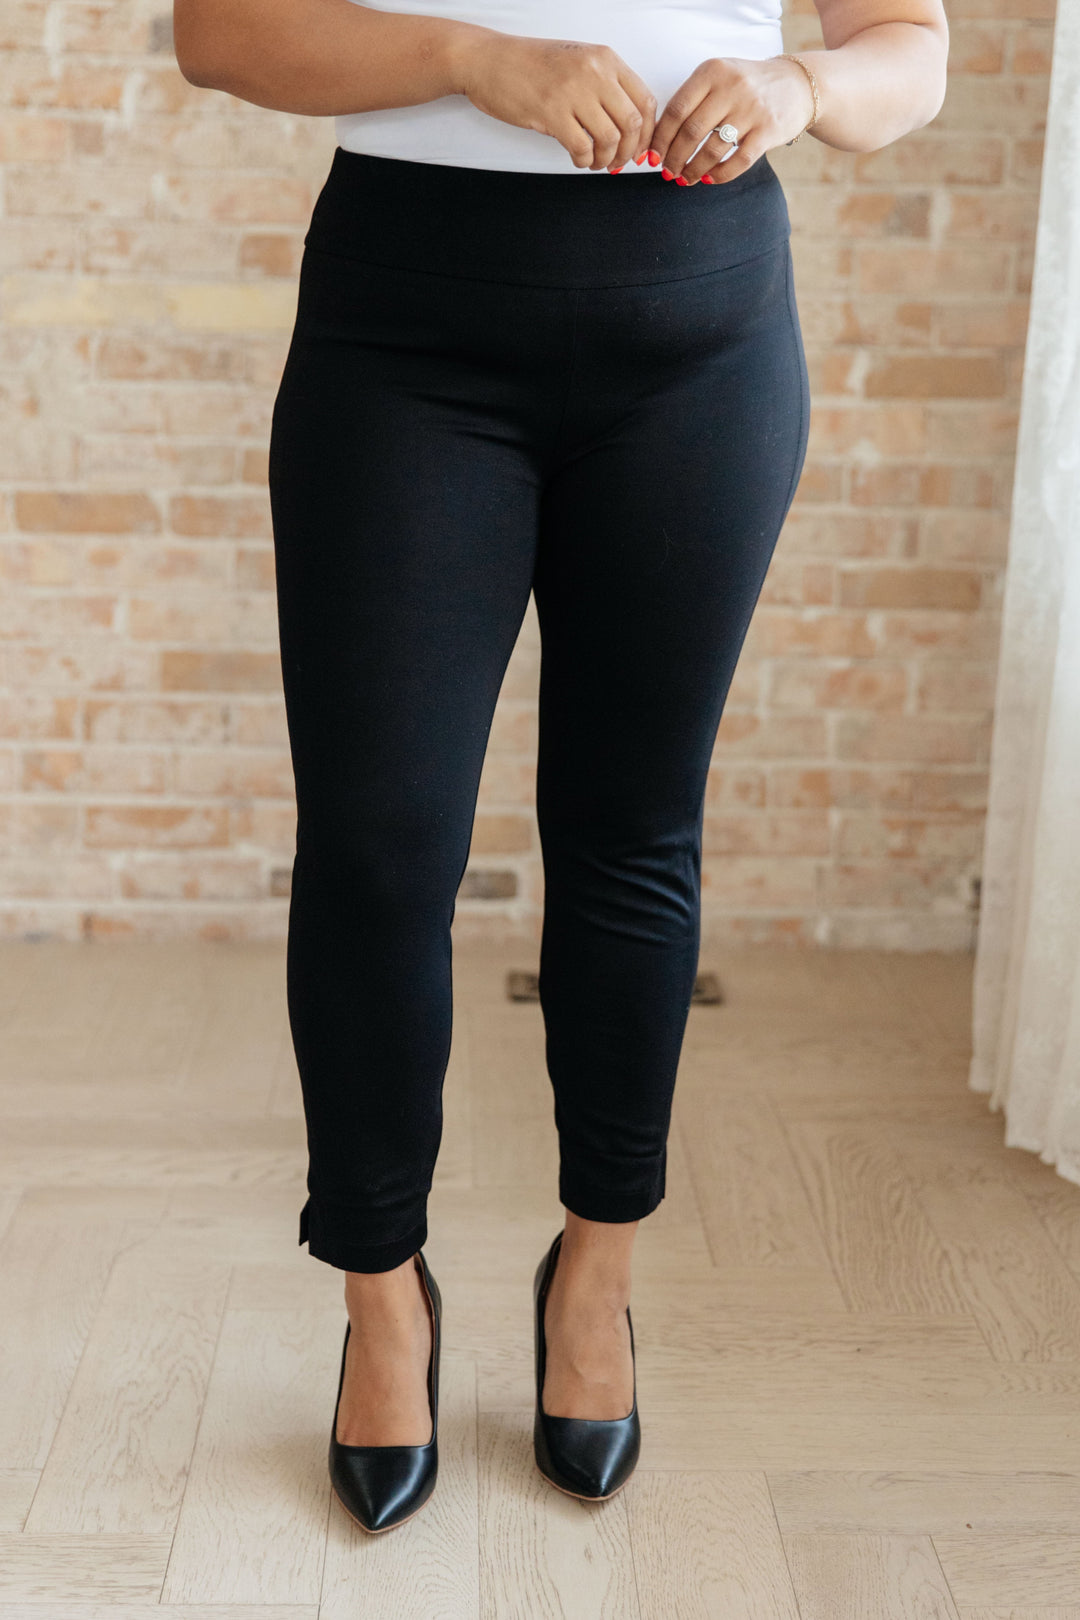 Magic Ankle Crop Skinny Pants in Twelve Colors-Pants-Inspired by Justeen-Women's Clothing Boutique in Chicago, Illinois